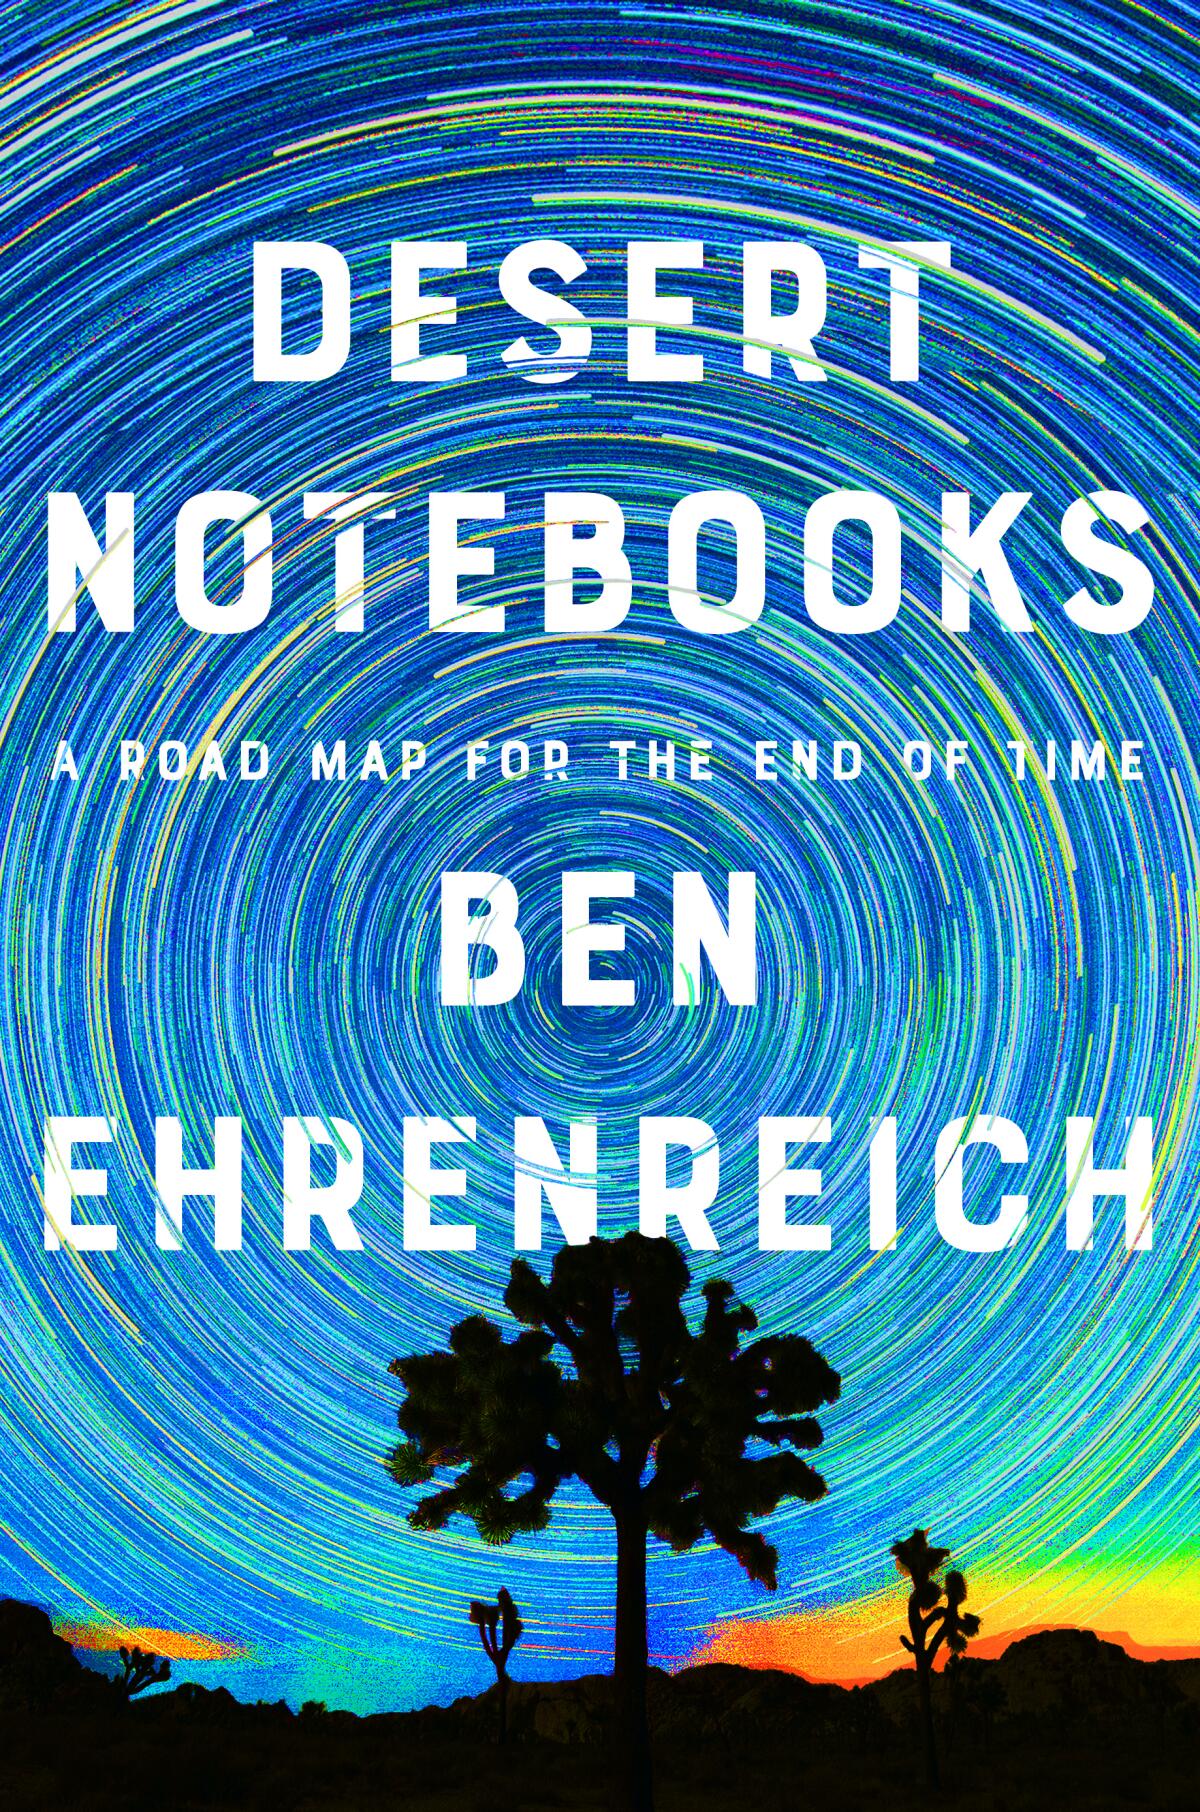 A book jacket for Ben Ehrenreich's "Desert Notebooks: A Road Map for the End of Time."